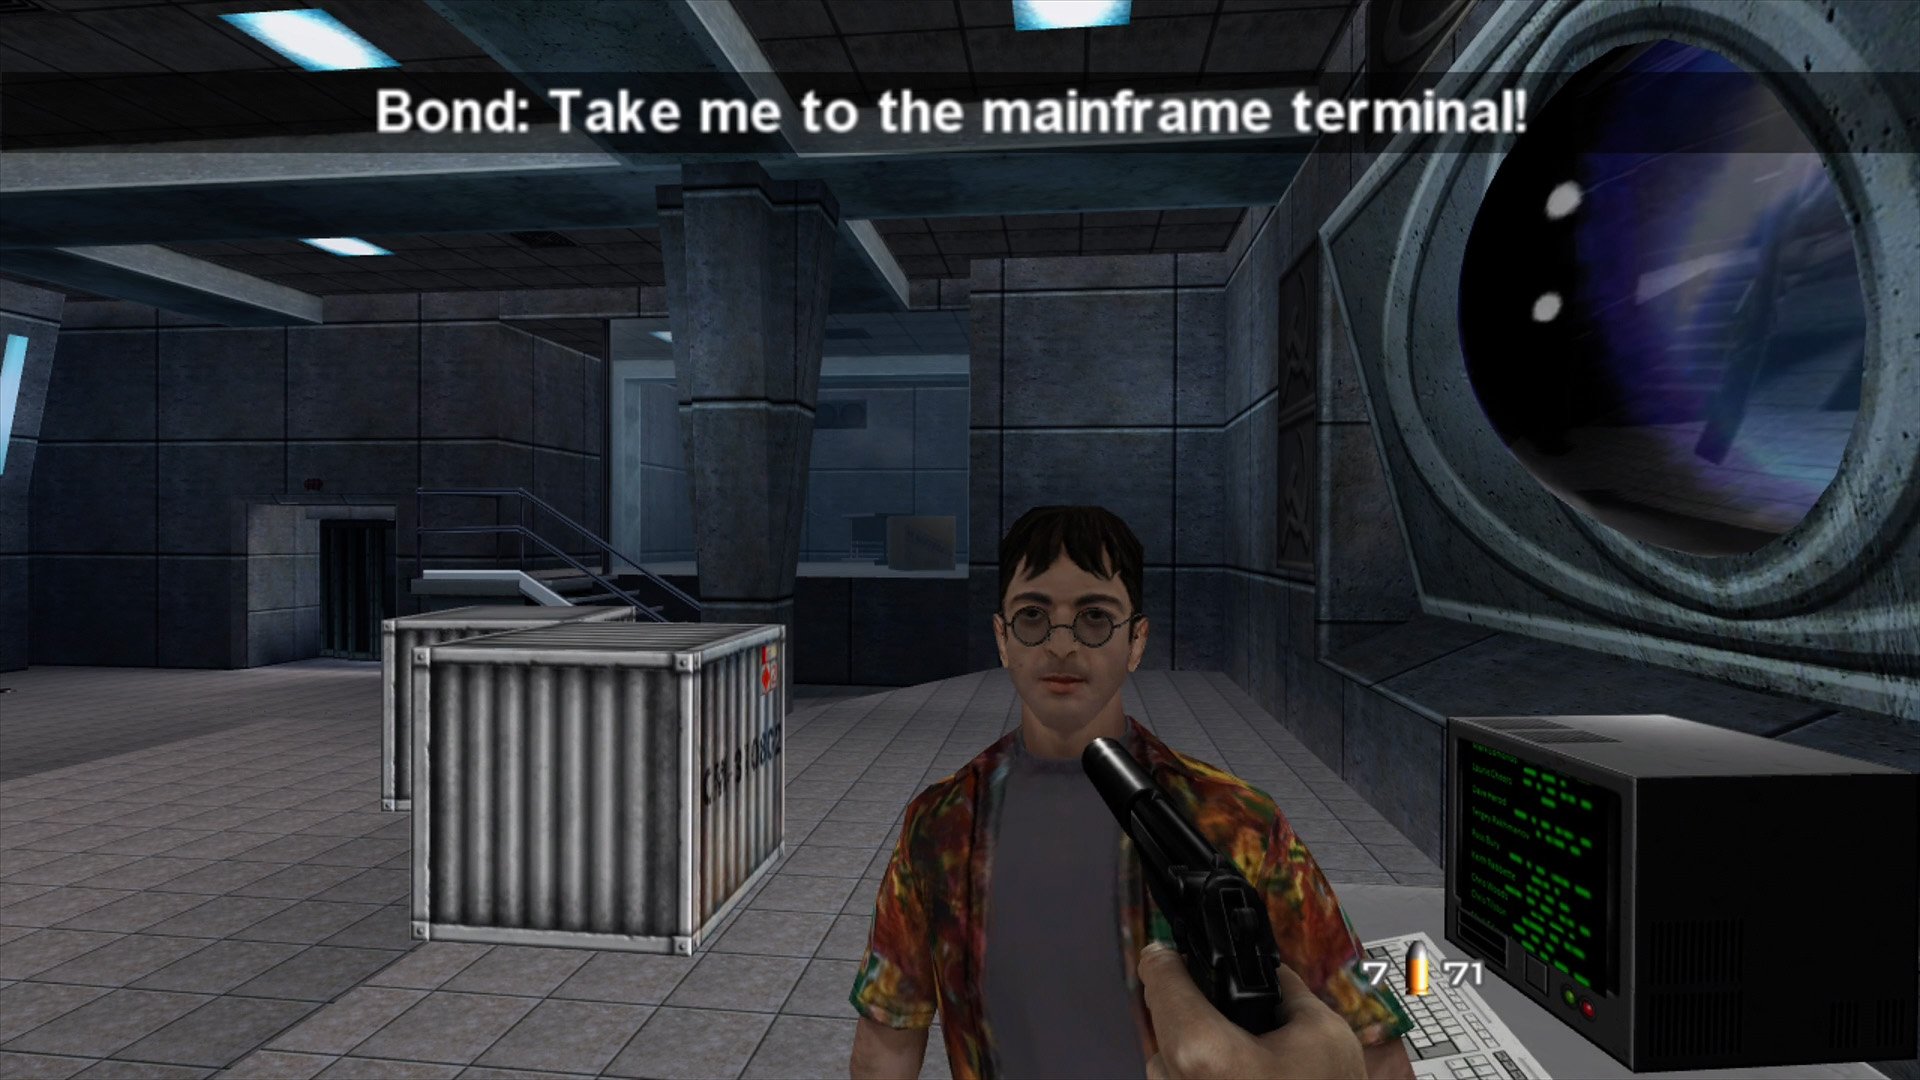 Why everybody's talking about a GoldenEye remaster